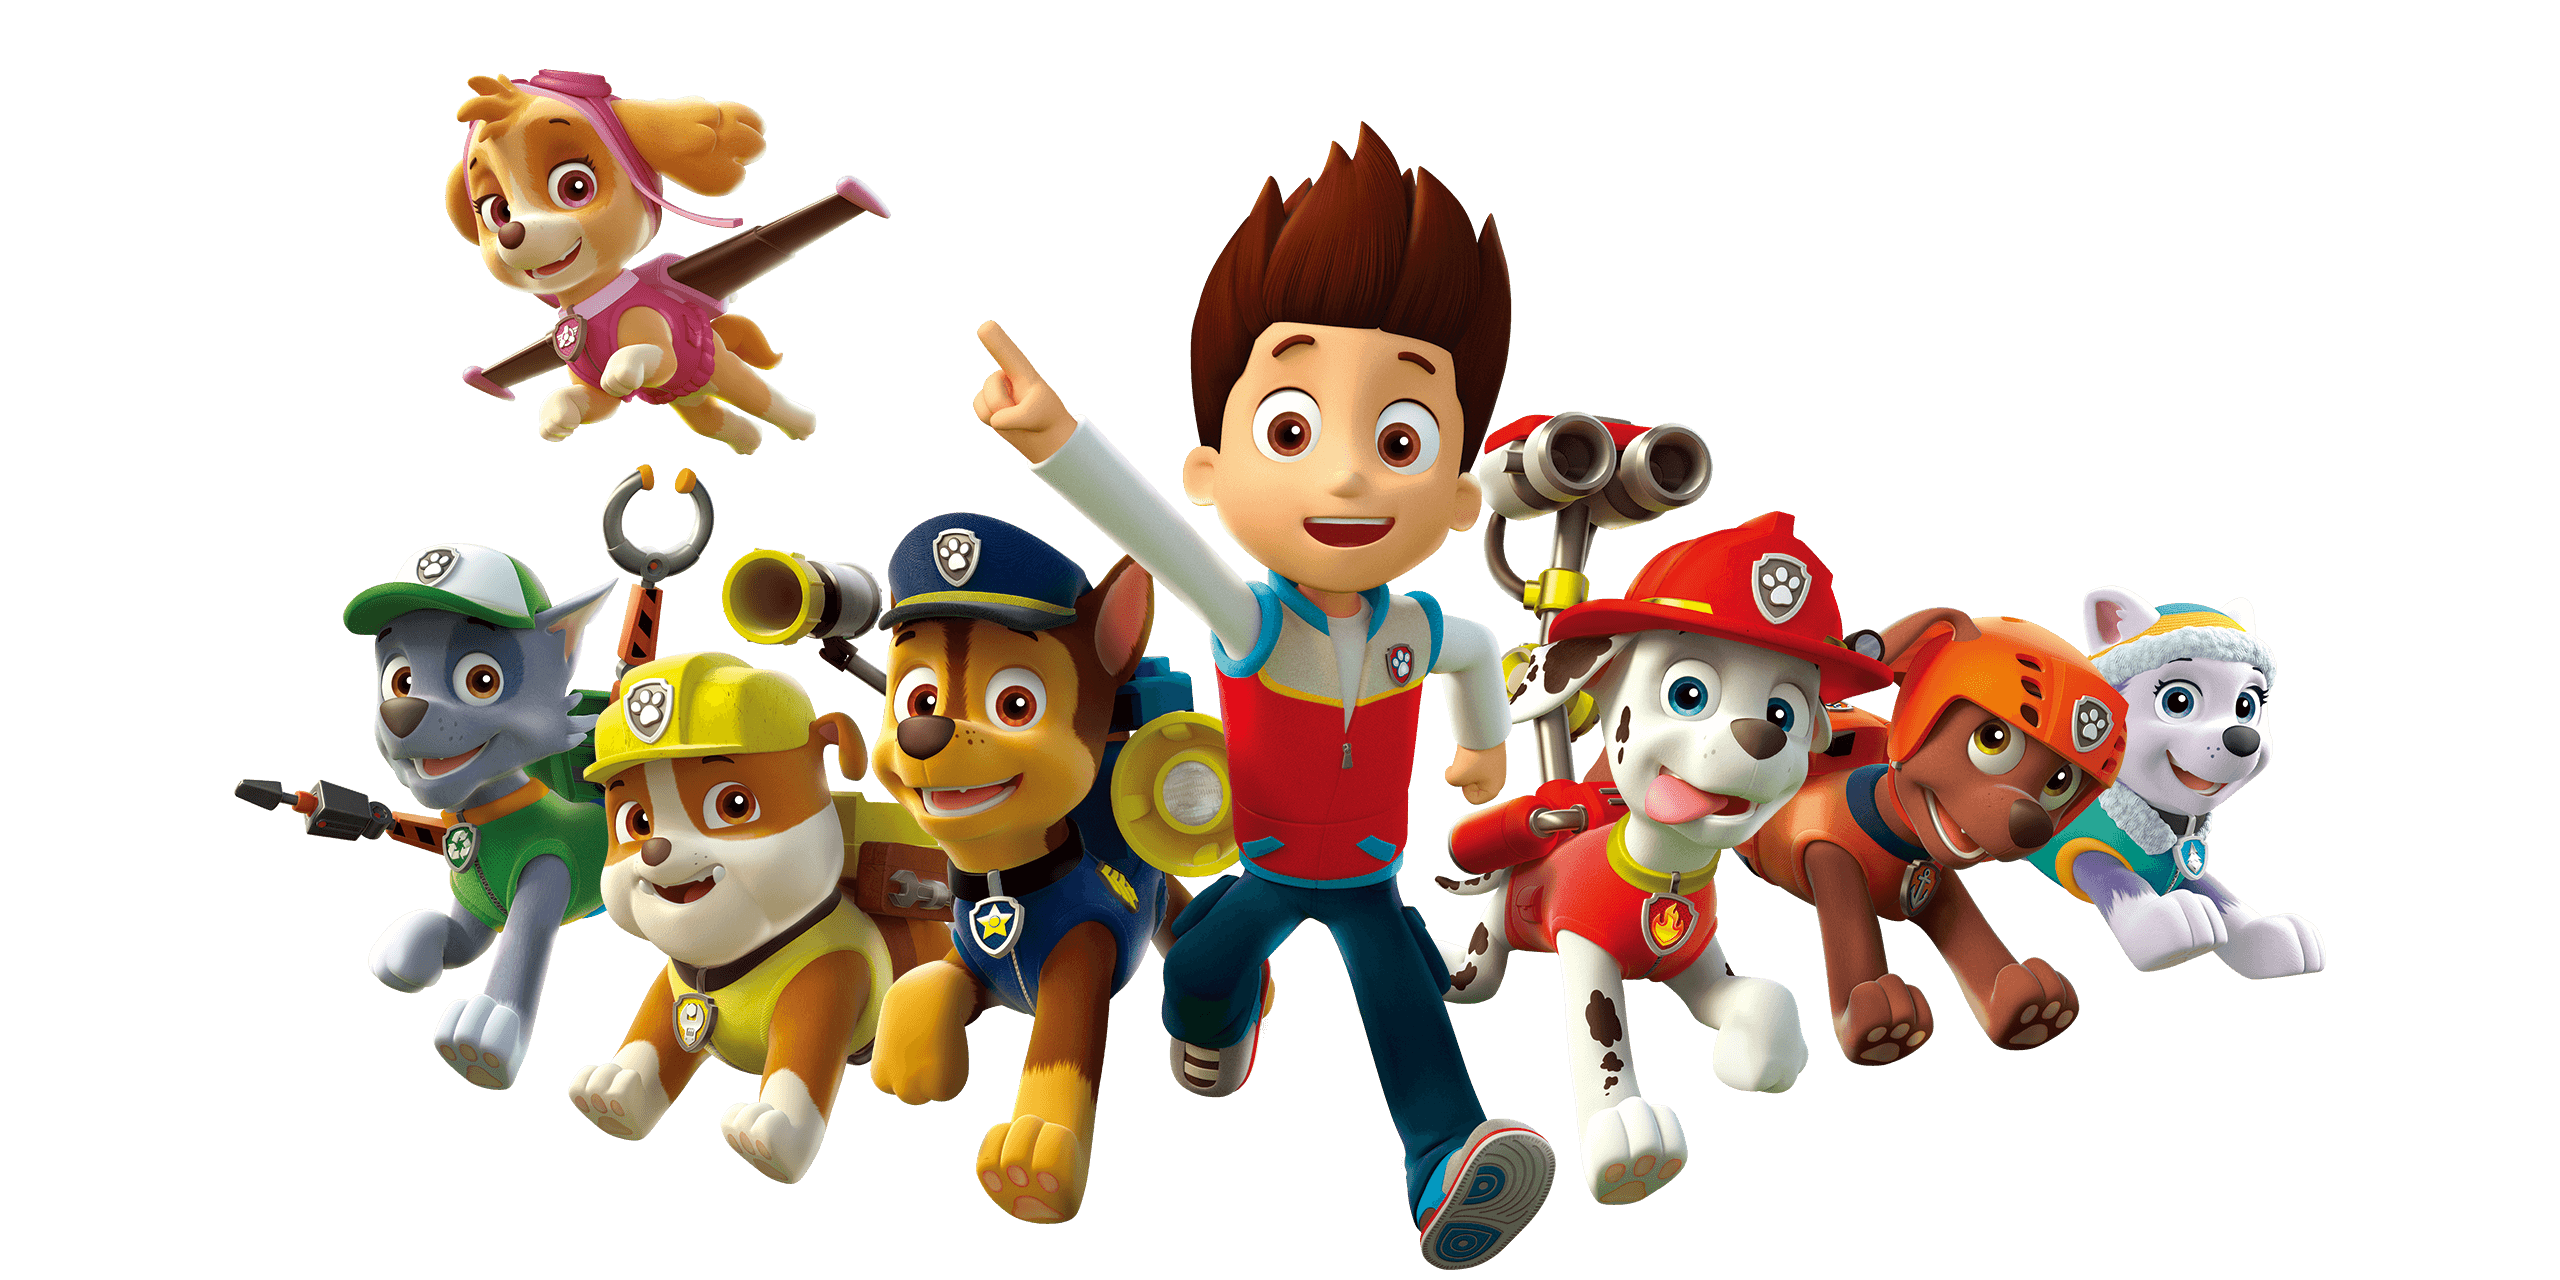 PAW Patrol home characters